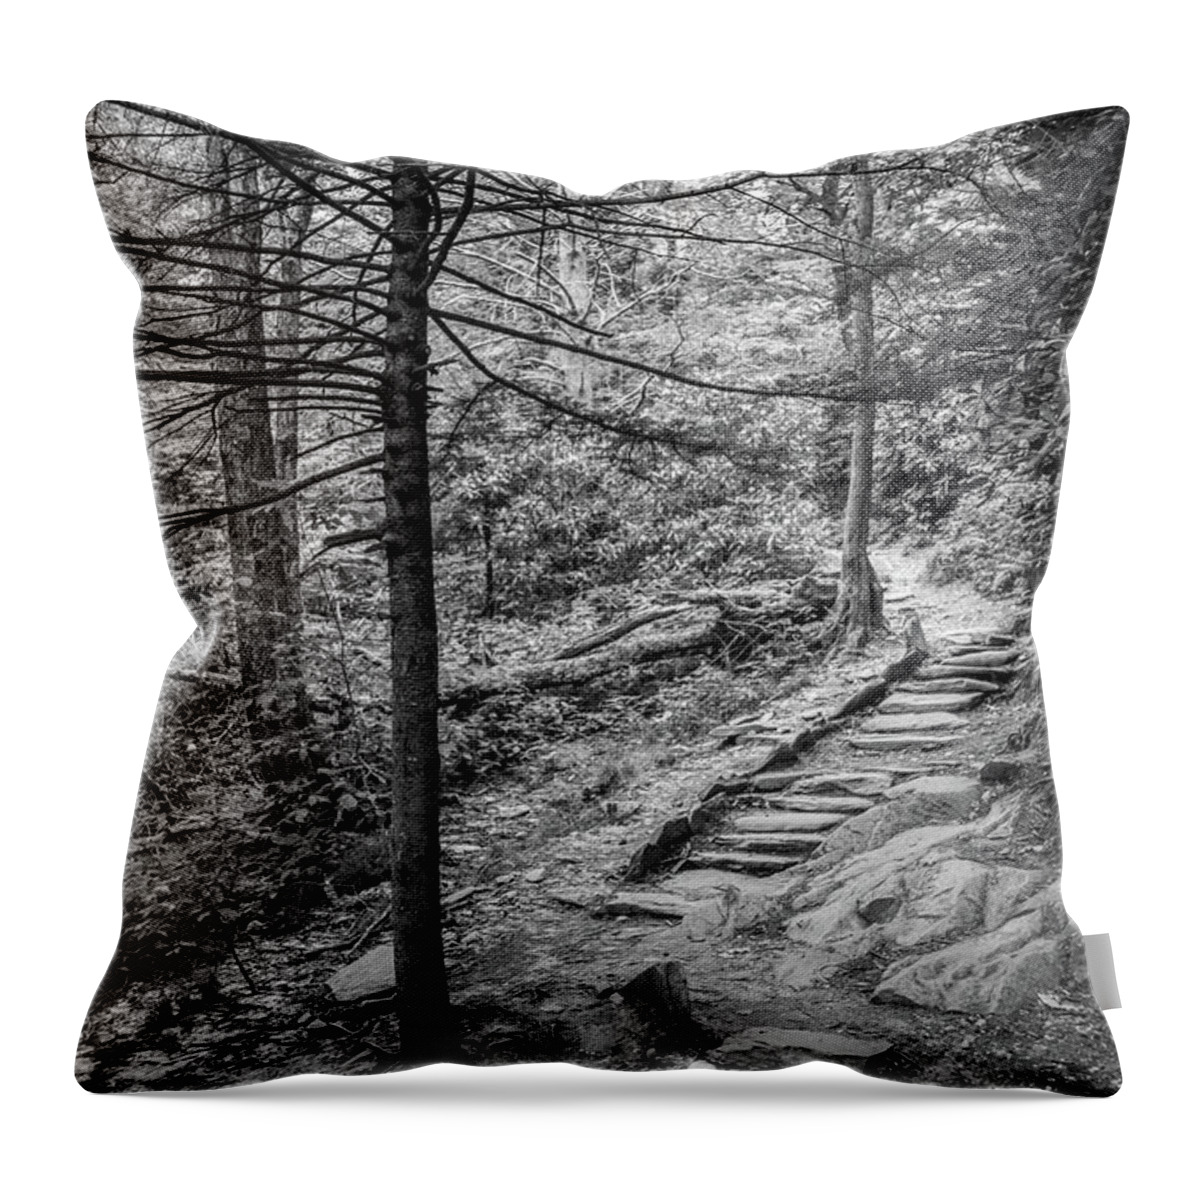 Hiking Throw Pillow featuring the photograph Hiking Trail by David Hart